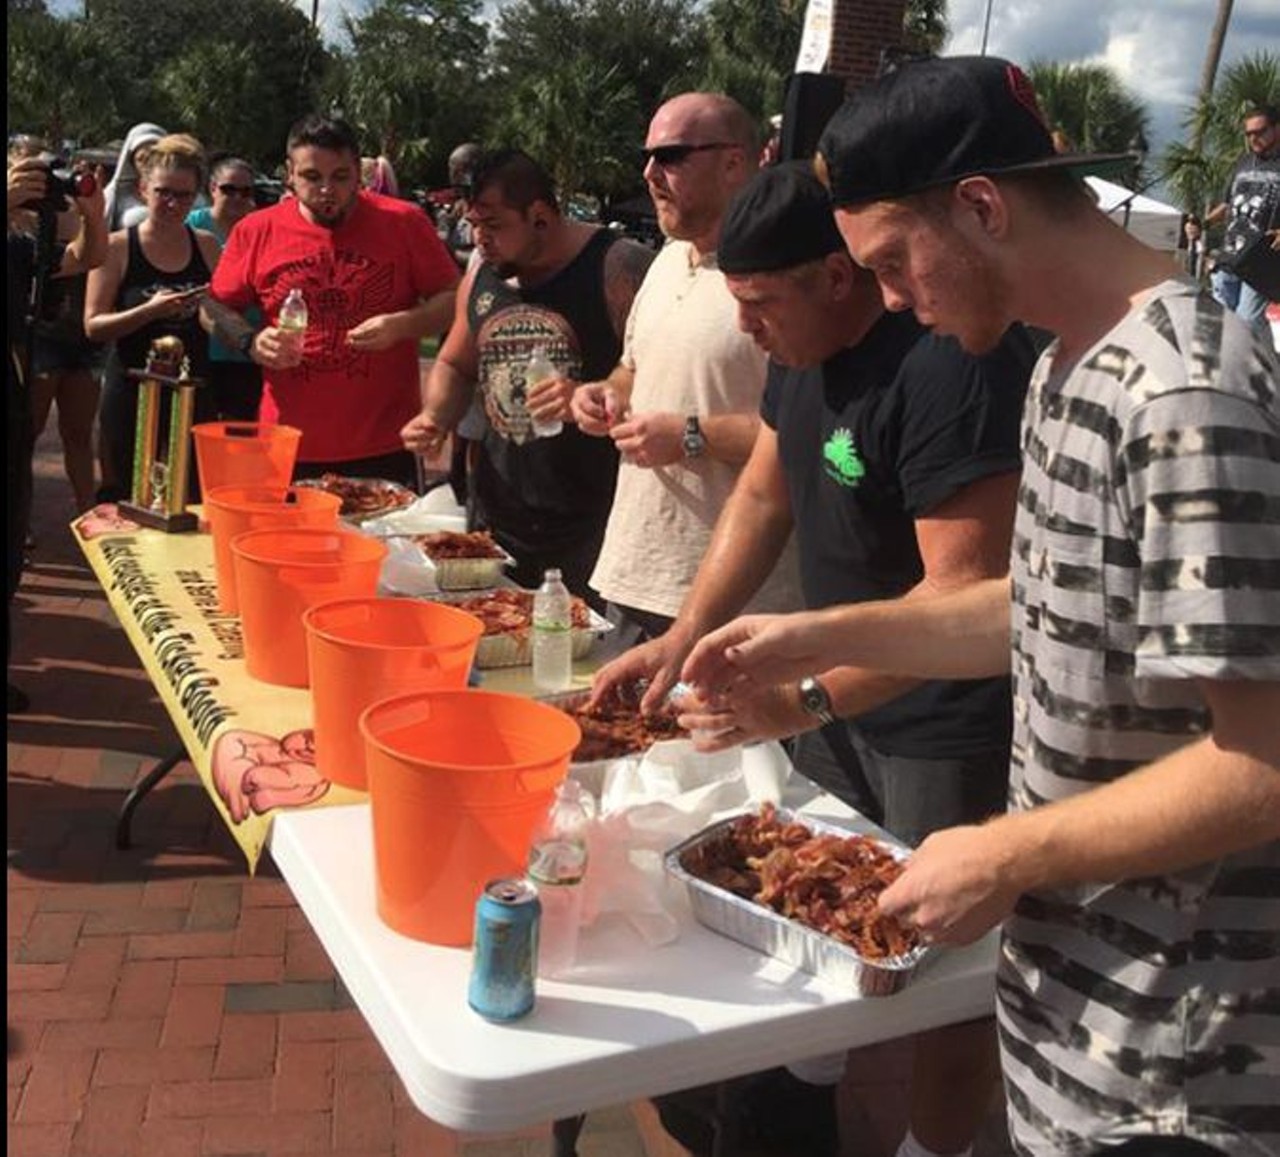 Saturday, Sept. 30 
DeLand Bacon and Brew Fest
Sample bacon-infused treats from several different restaurants while sipping beer from 35 different breweries.
1 pm - 7 pm; Earl Brown Park, 750 S Alabama Ave, DeLand; $15 - $60; (386) 316-2959 baconandbrewfestdeland.com/
Photo via baconandbrewfestdeland.com